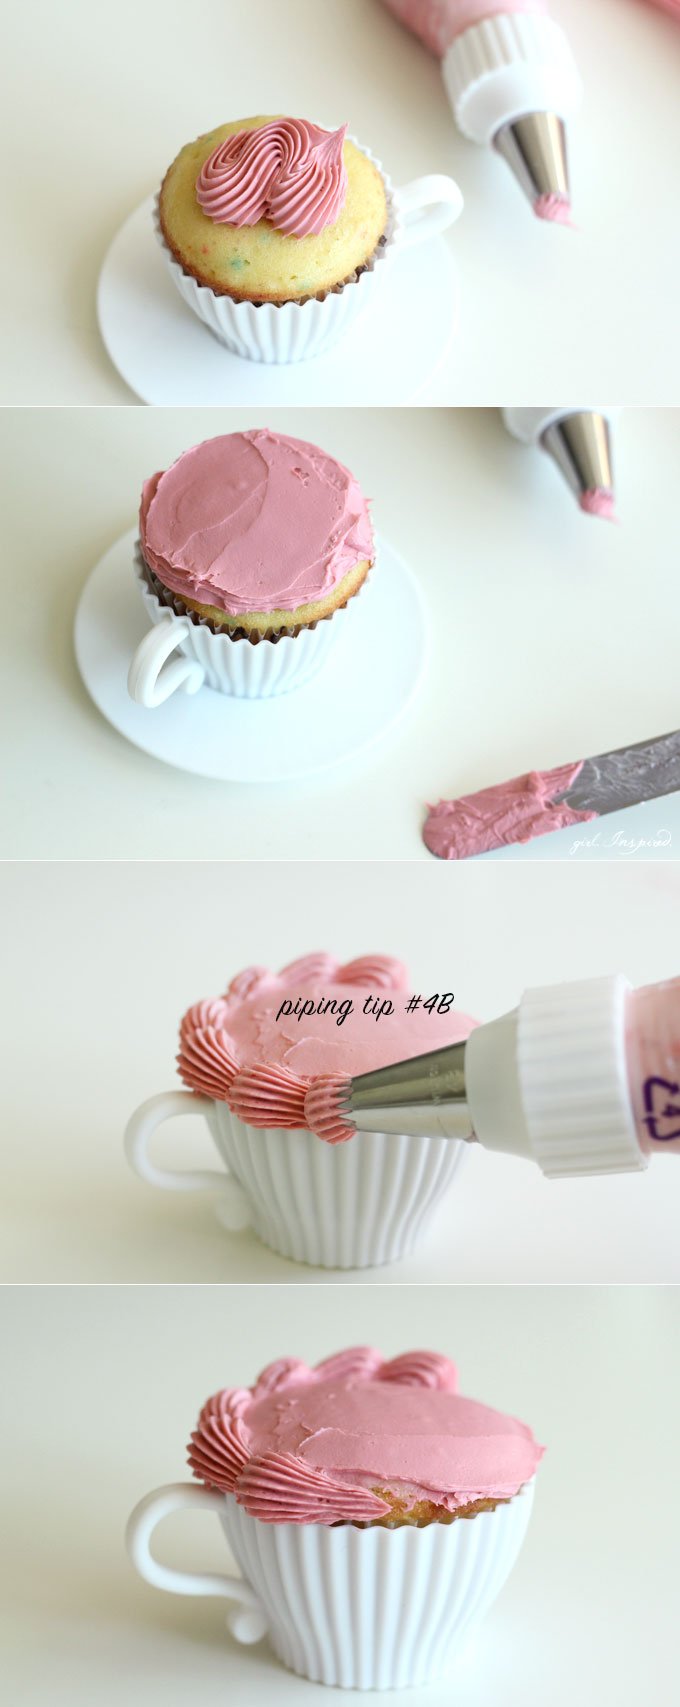 Four simple but stunning cake decorating techniques #JoAnnGoesPink